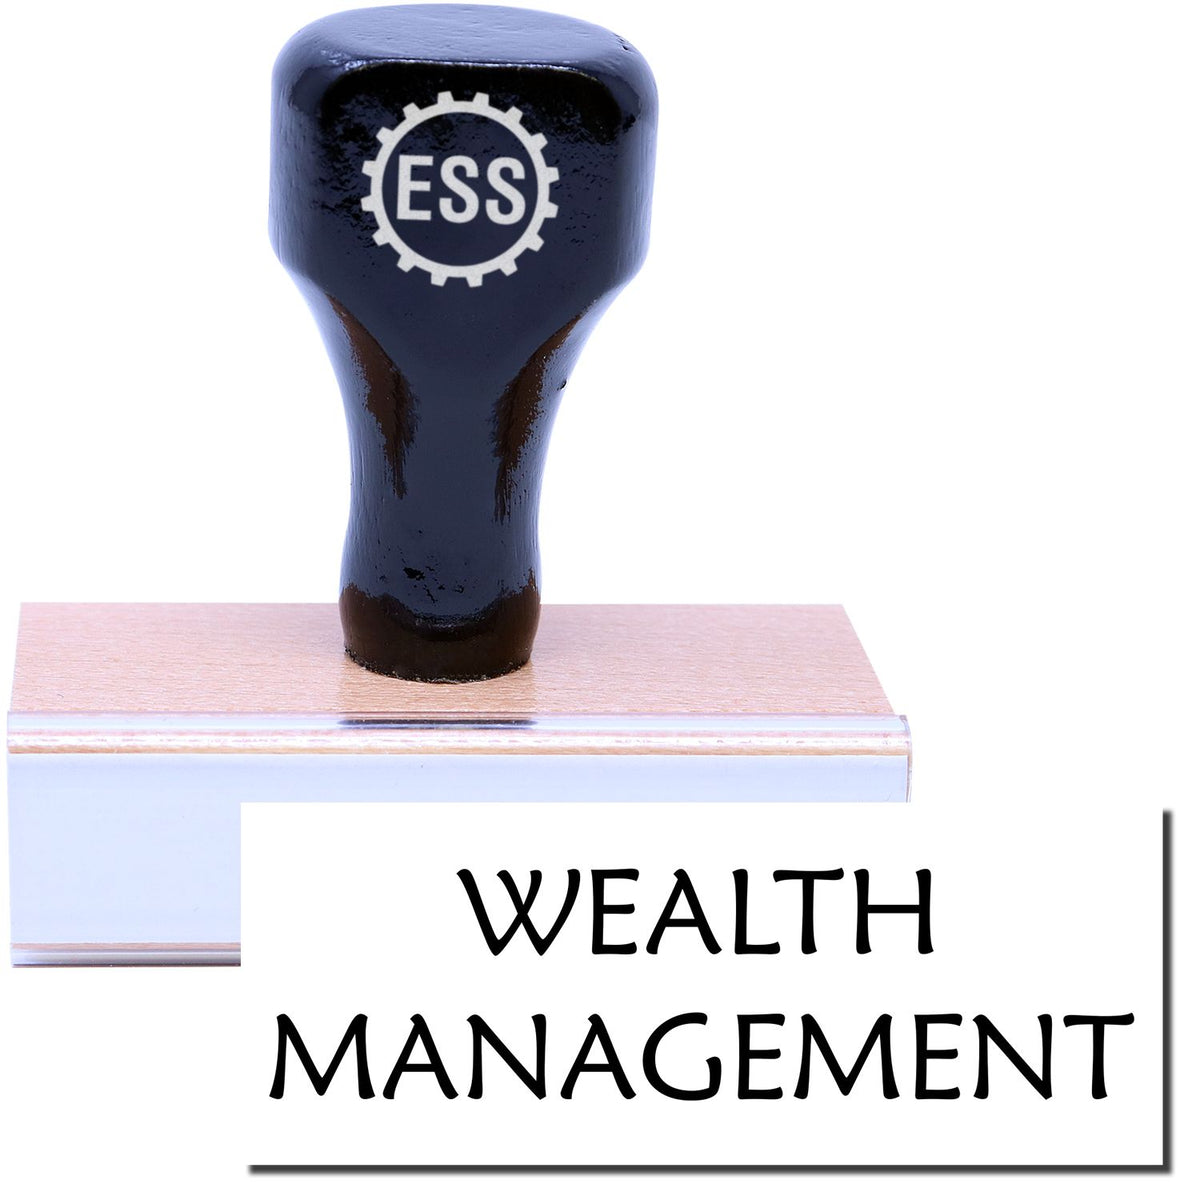 A stock office rubber stamp with a stamped image showing how the text &quot;WEALTH MANAGEMENT&quot; in a large font is displayed after stamping.